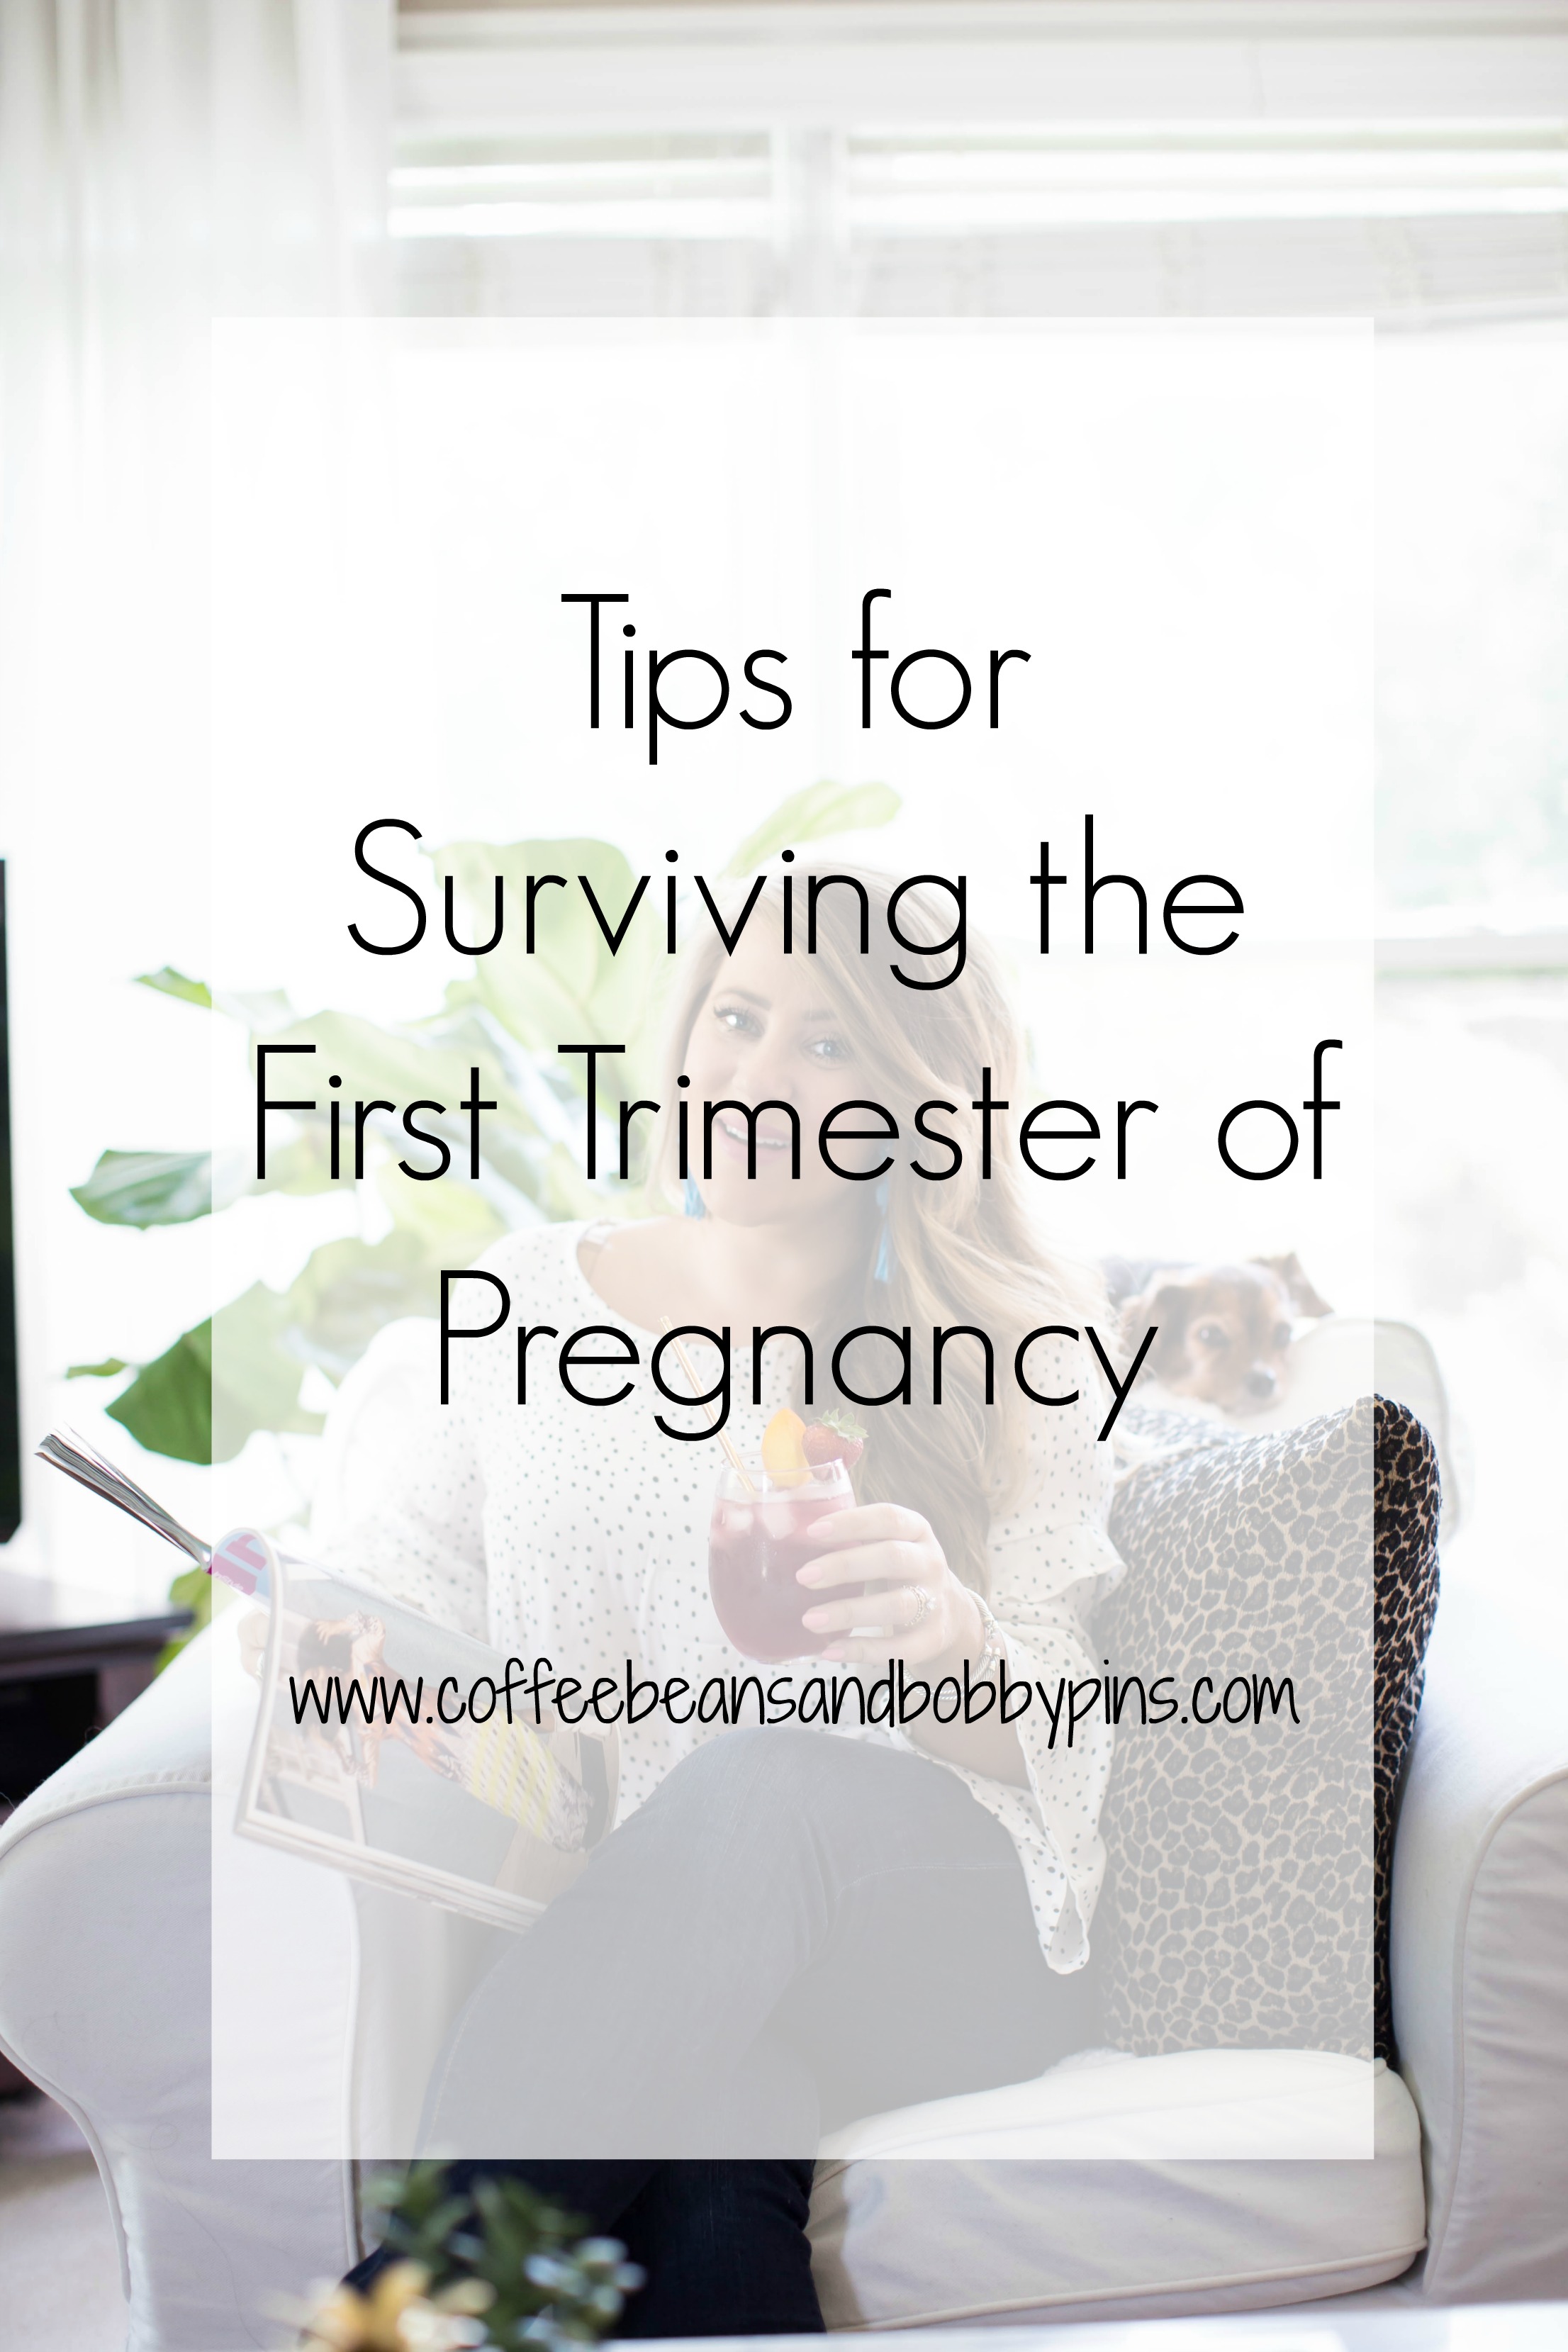 Tips for Survivin the First Trimester of Pregnancy